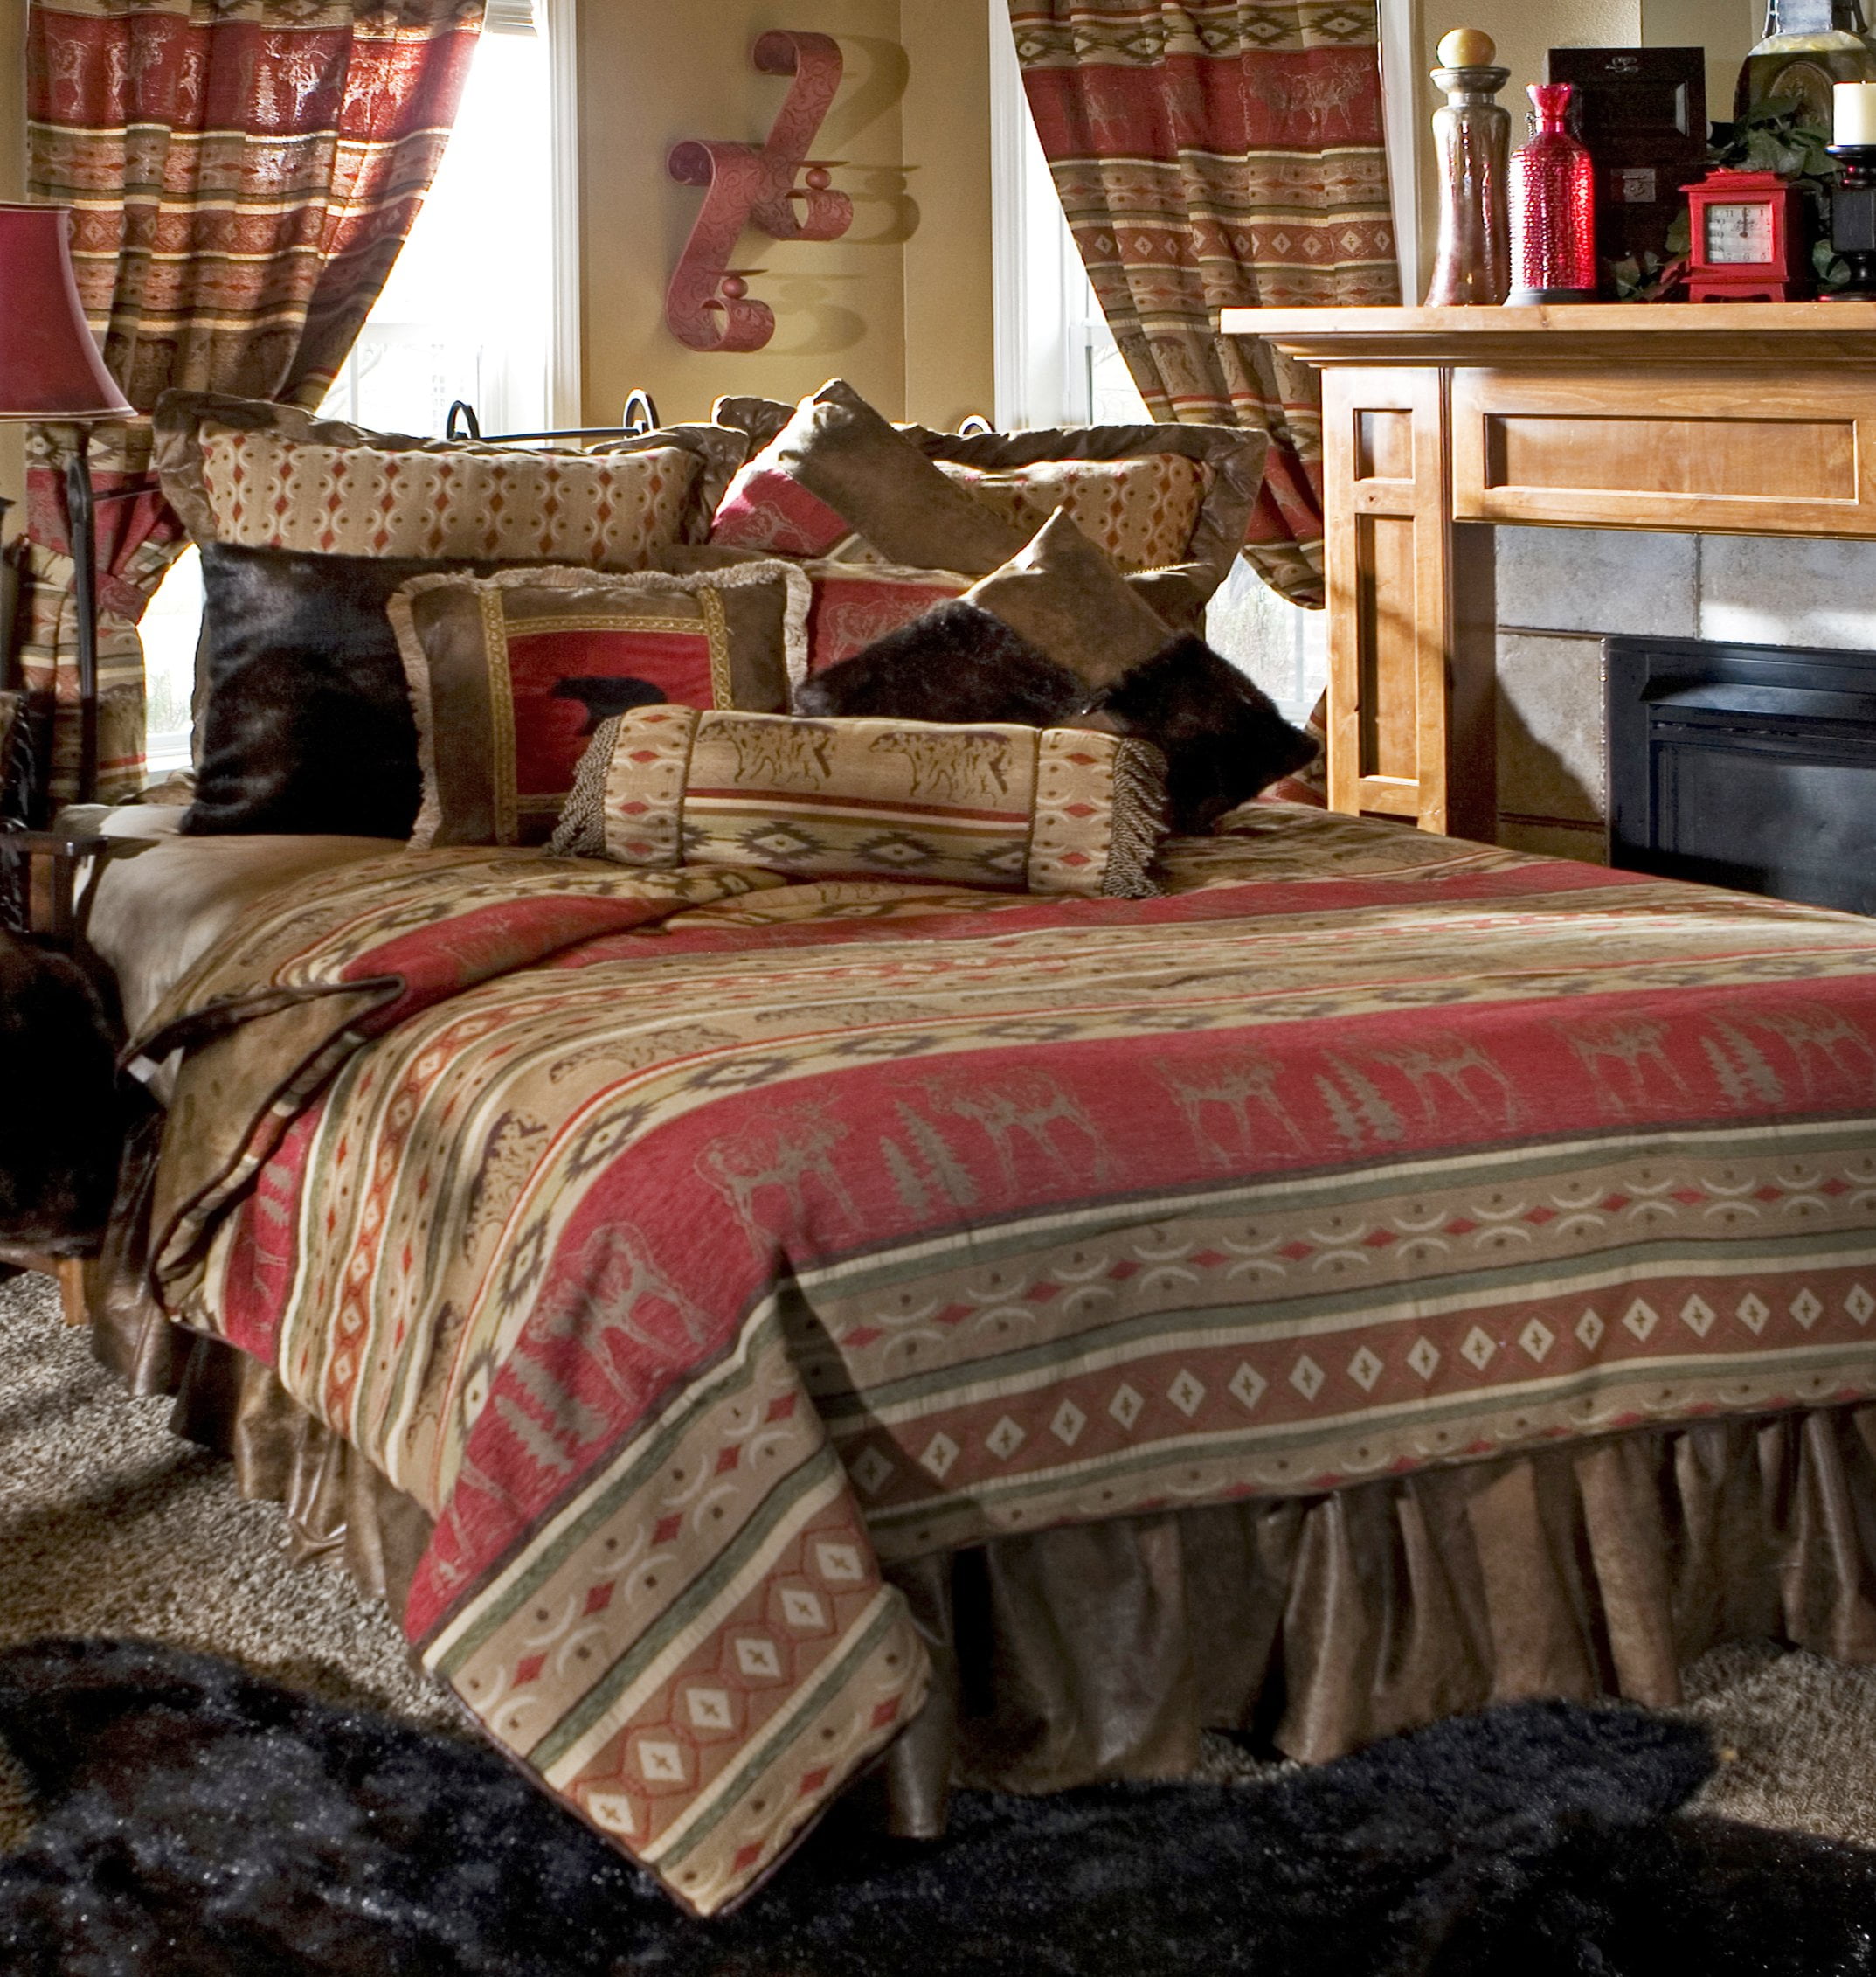 Rustic bed sheets